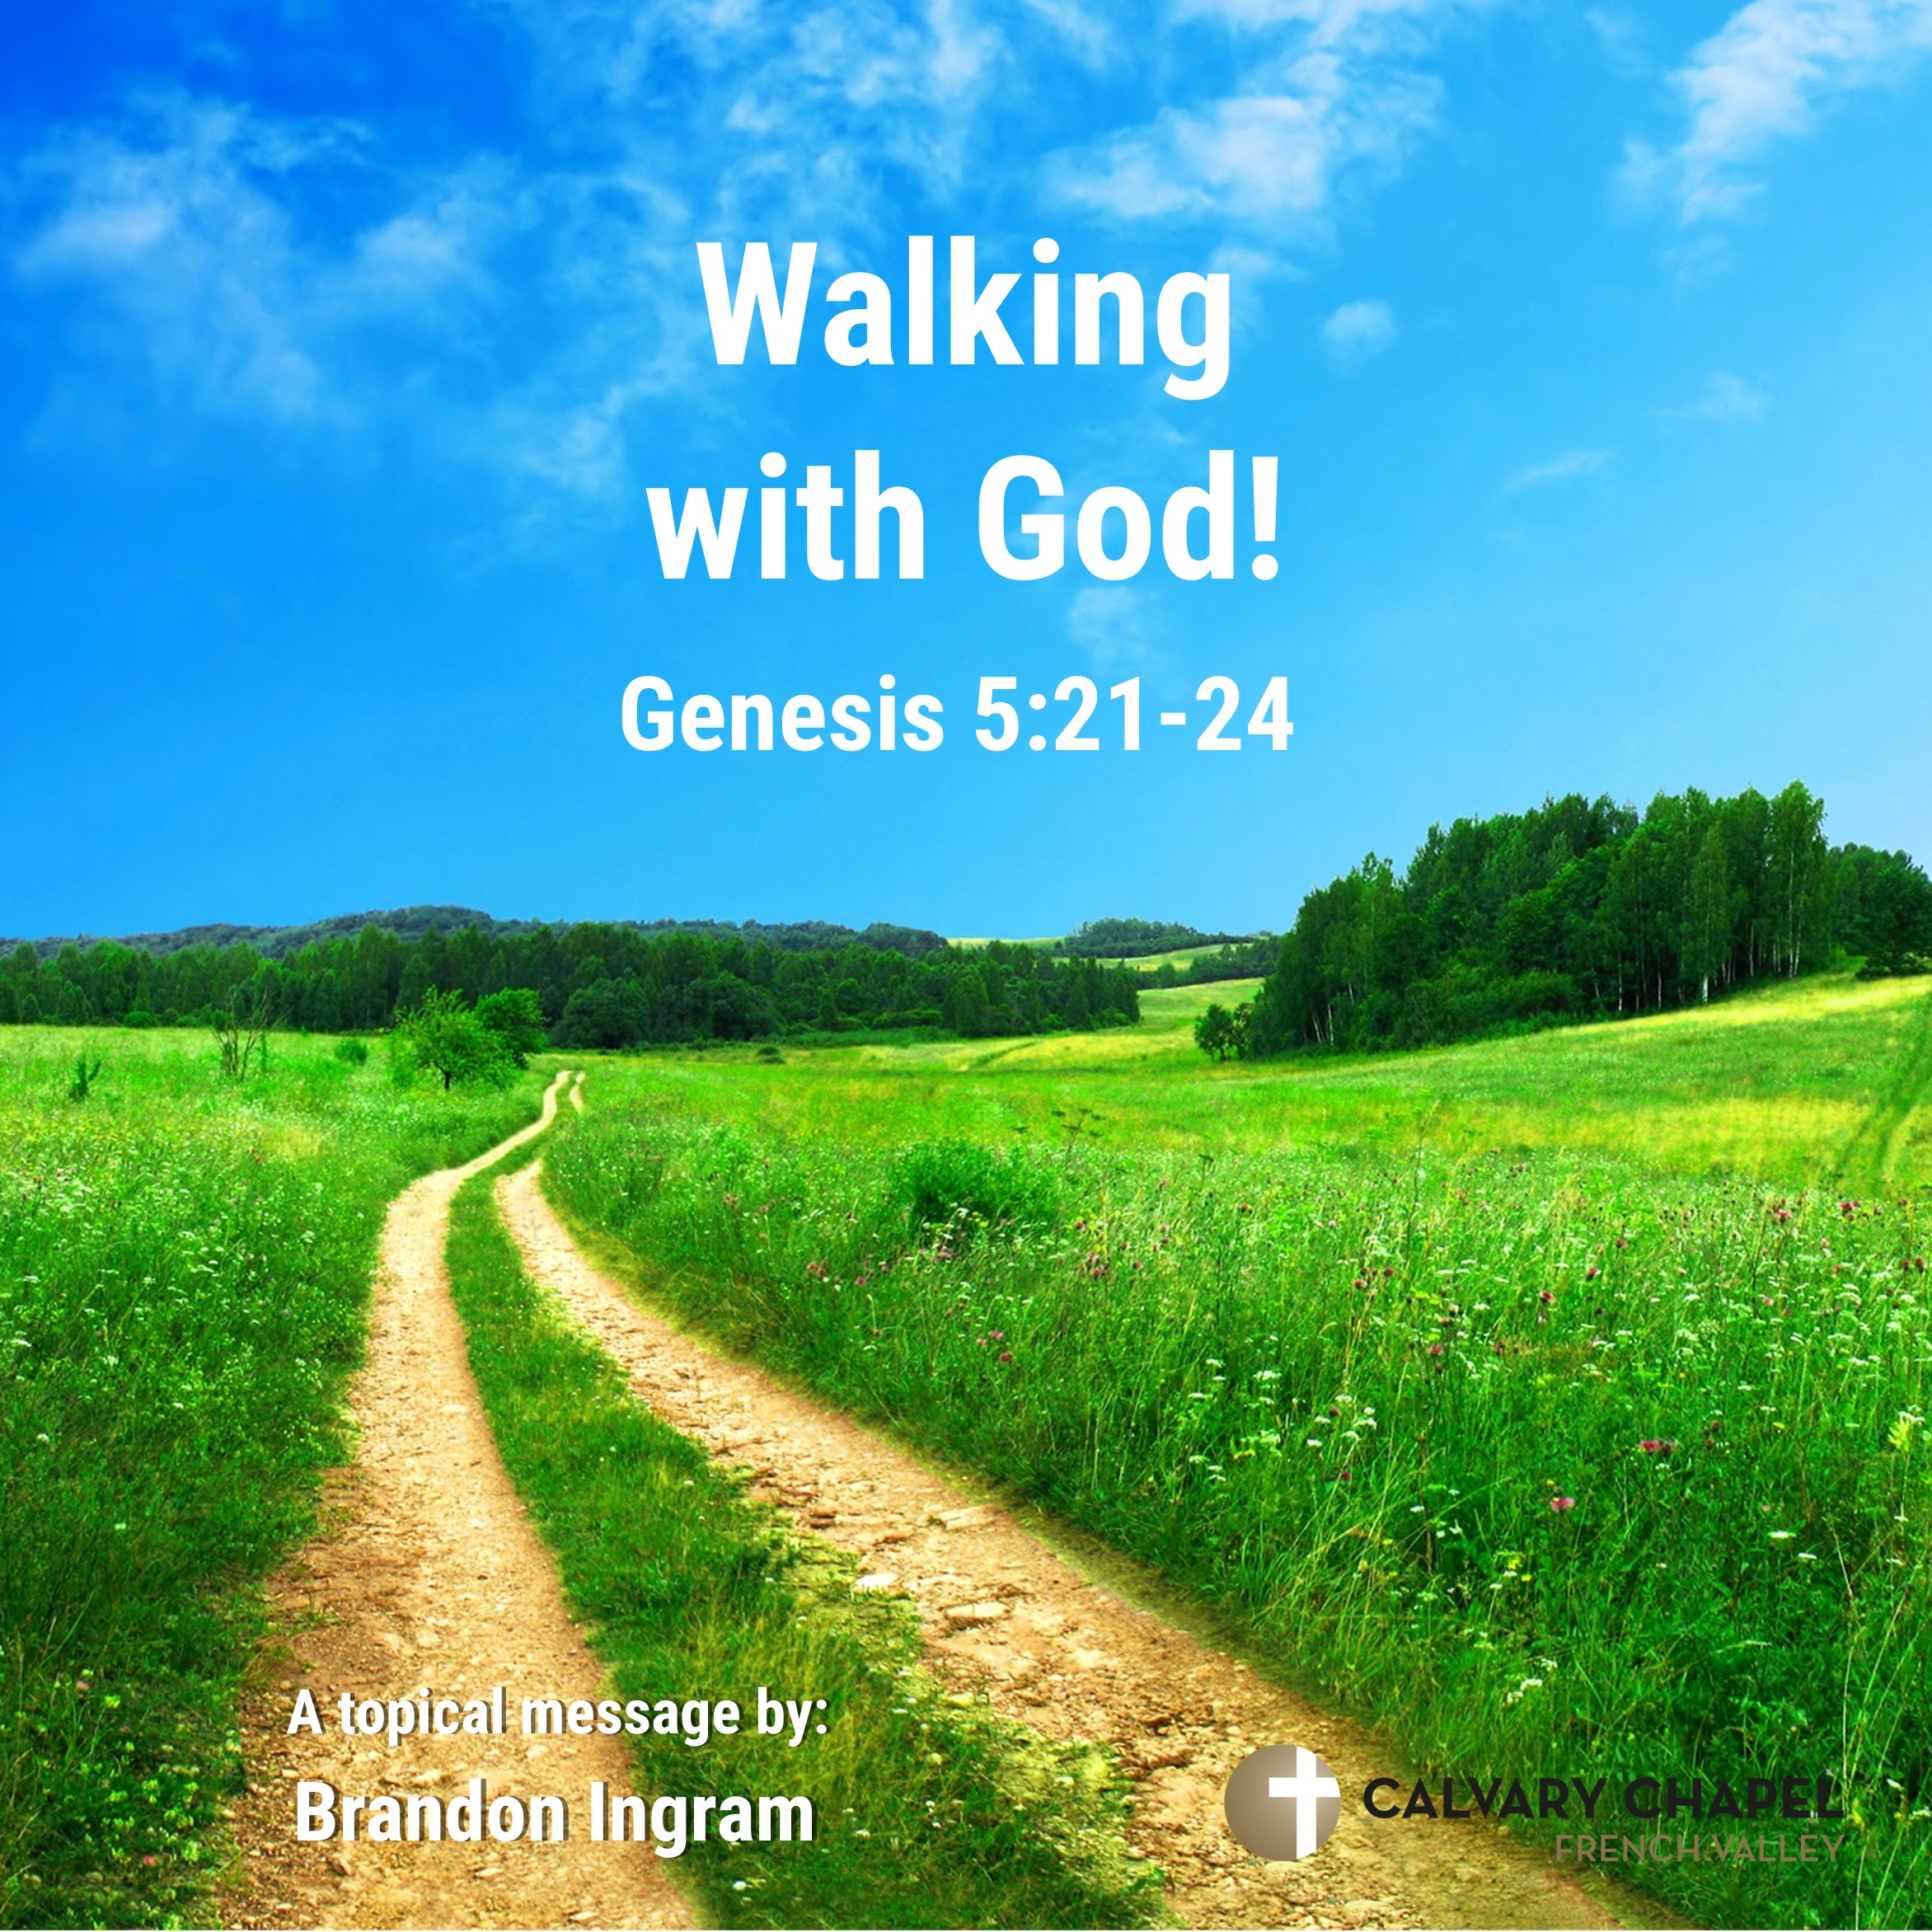 Walk with God! Genesis 5:21-24 – A topical message by Brandon Ingram - Topical Messages